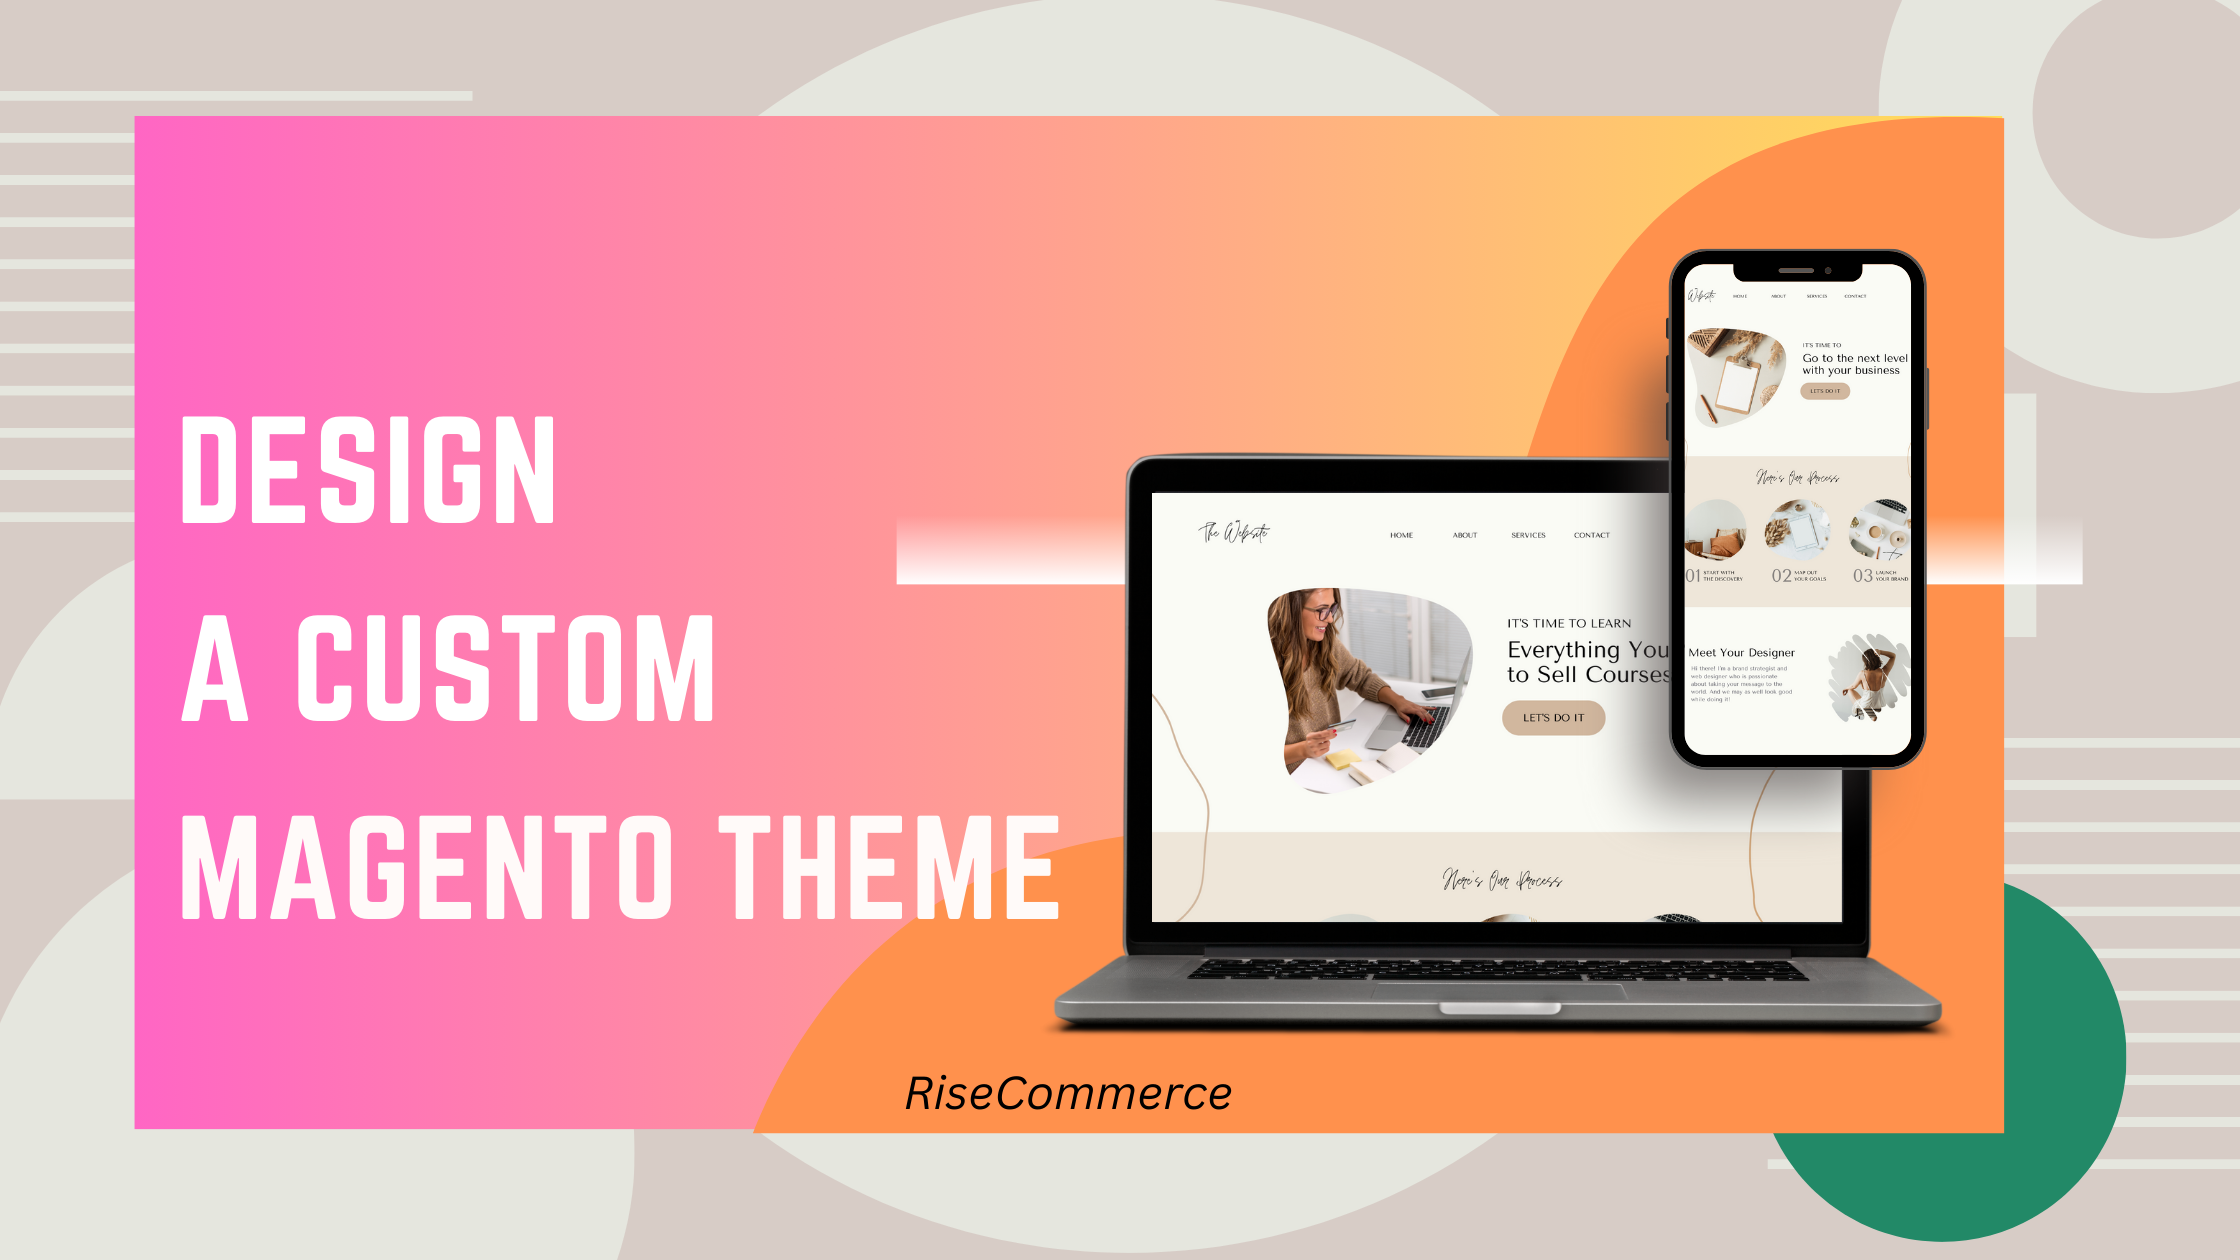 How to Design a Custom Magento Theme-RiseCommerce